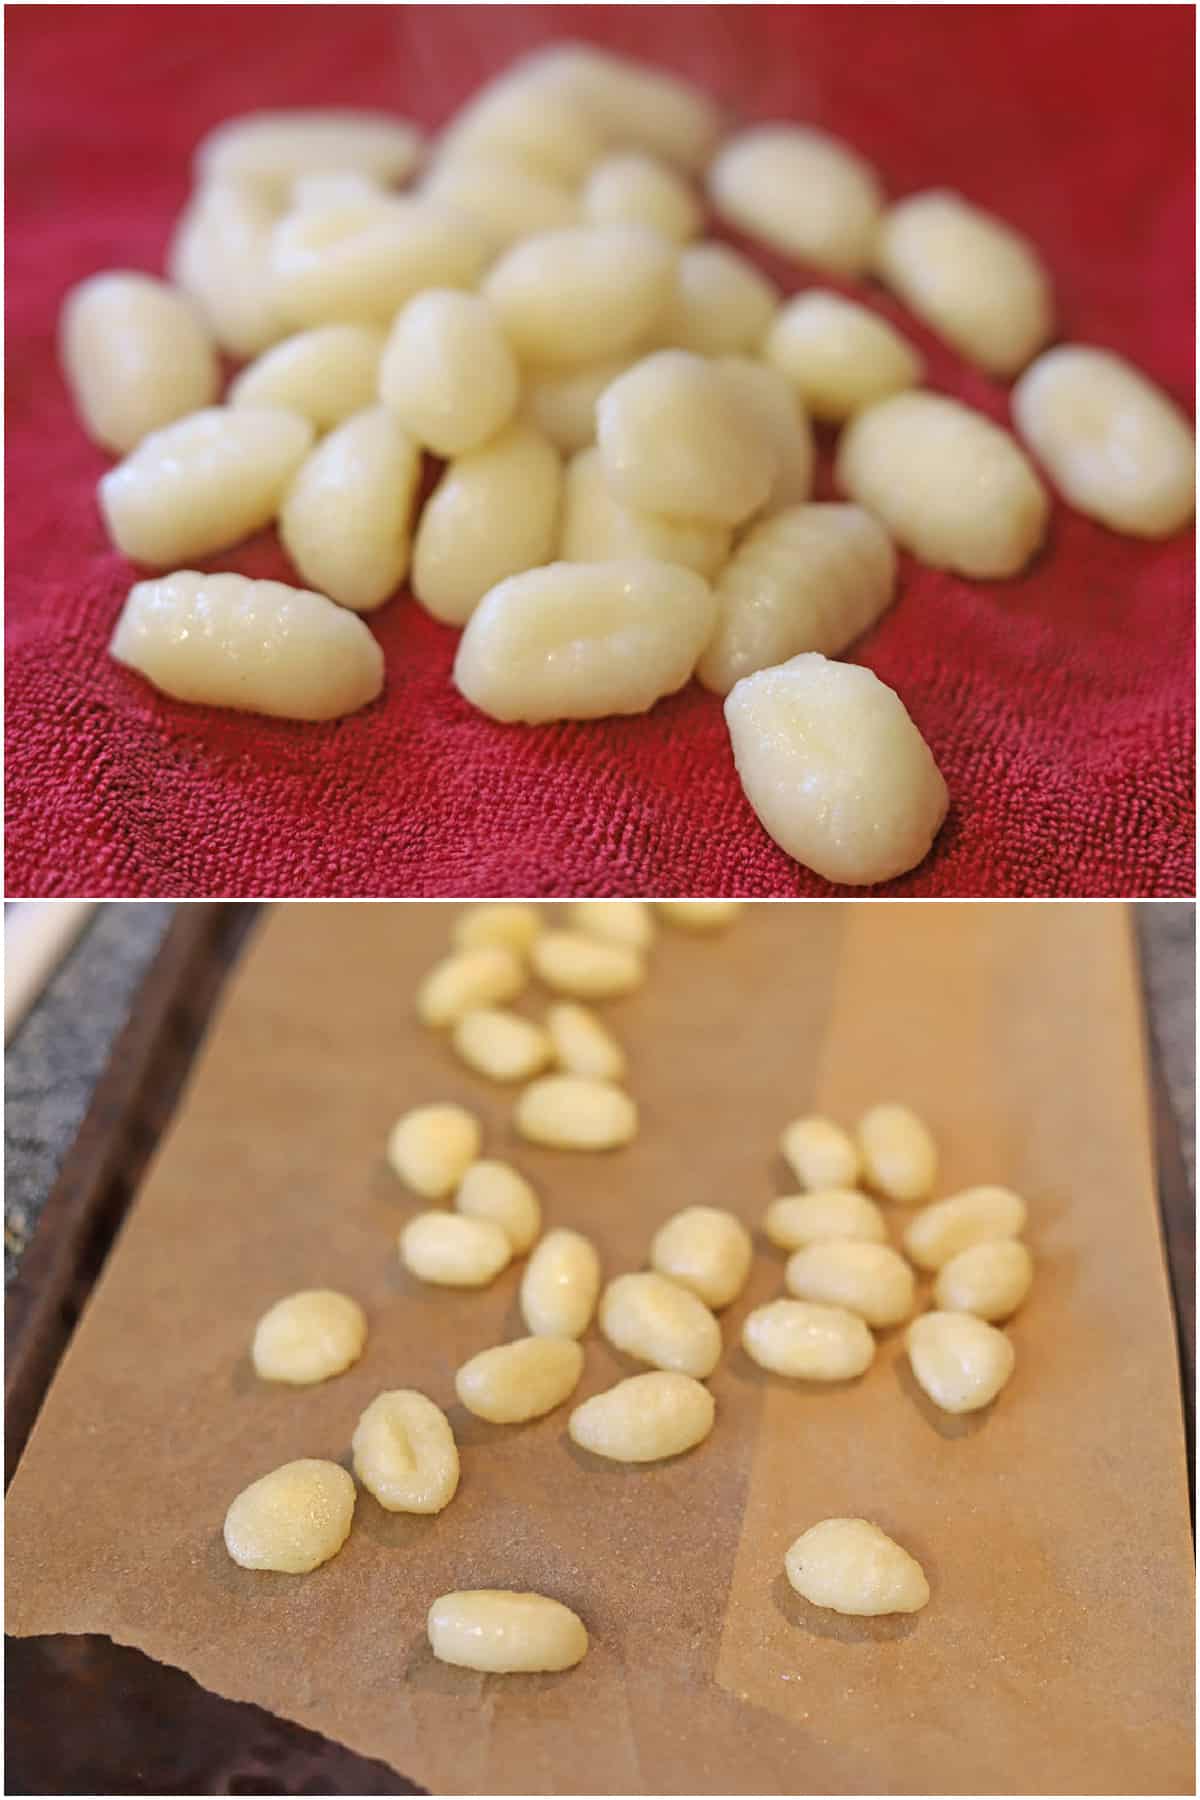 Collage with gnocchi drying on towel and gnocchi on a parchment paper covered baking sheet.